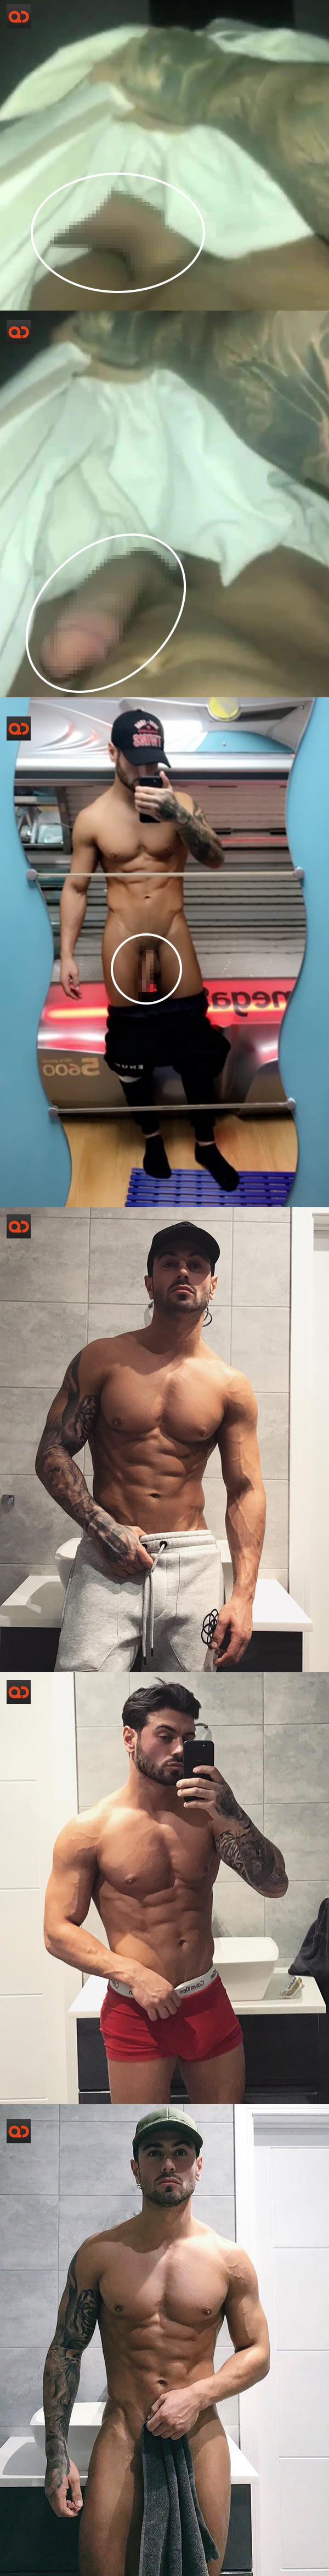 Mitch Palmer's Long Cock Exposed Again In New Leaked Selfies And Racy Snaps!